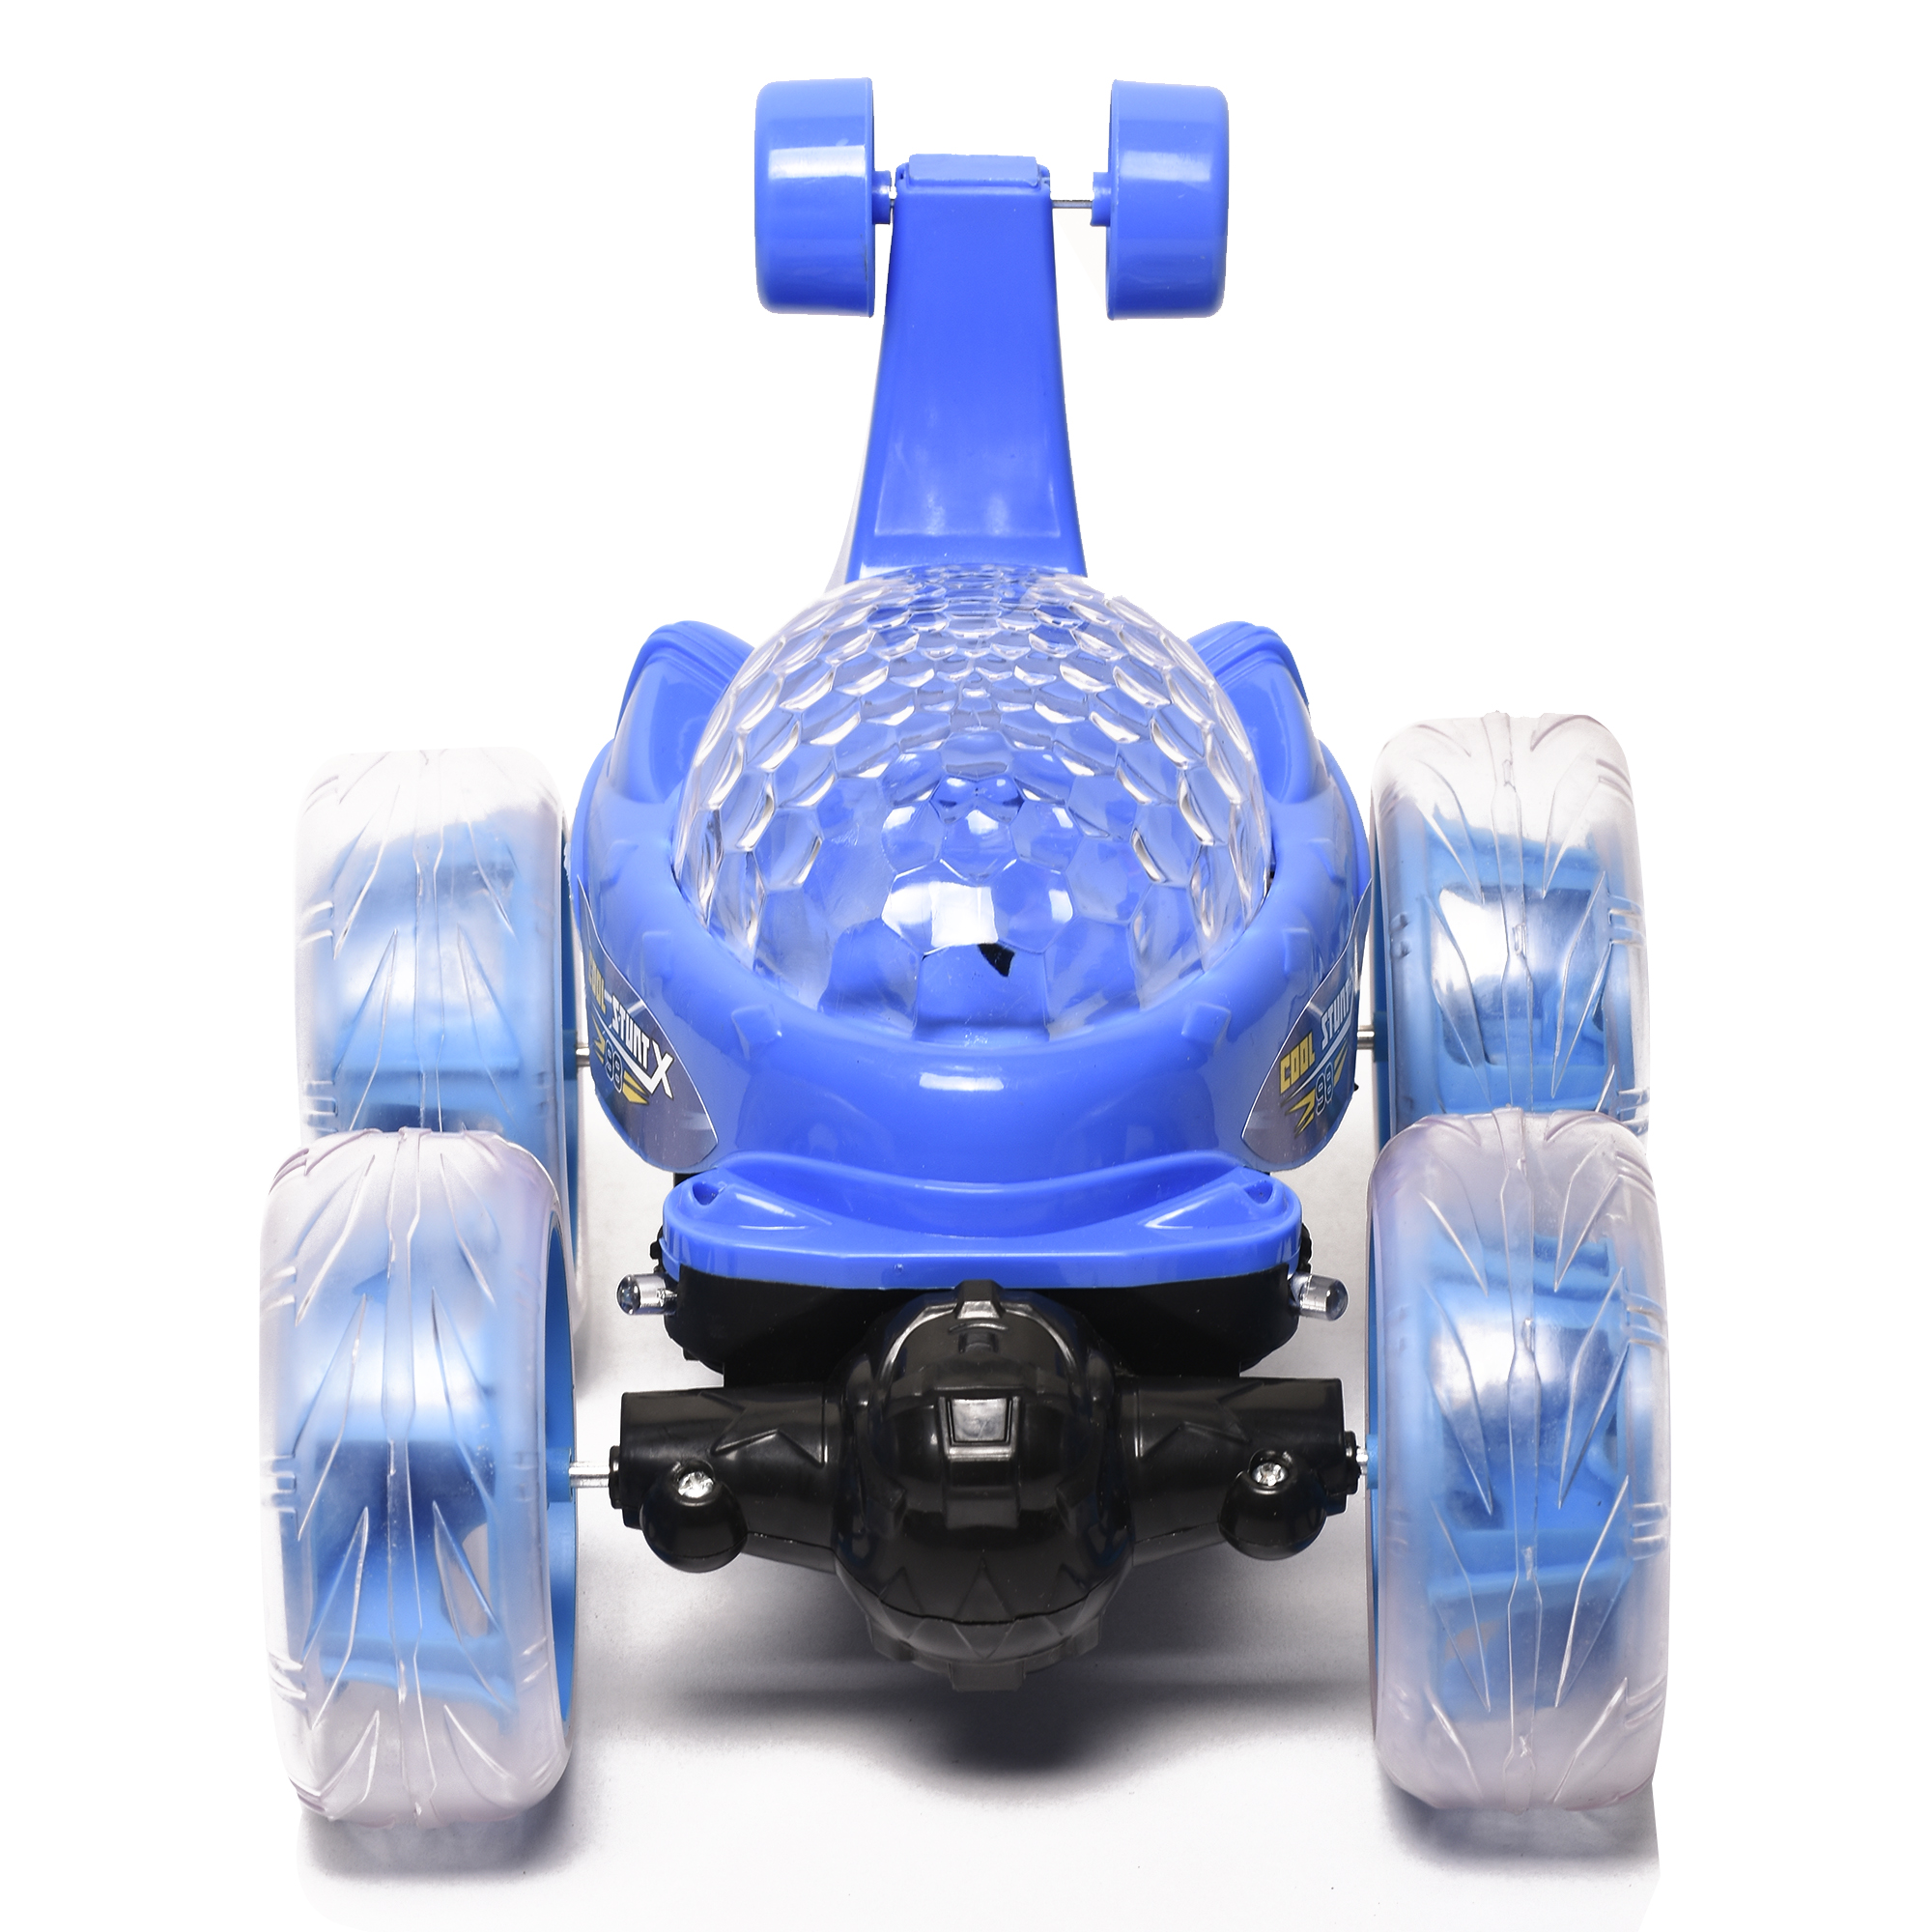 Rechargeable Remote Control Stunt Tipper RC Car Acrobatic 360 Degree Spiral Spin Twisting Stunt Car with Colorful Lights & Music Toys for Kids 5+Years (Blue)